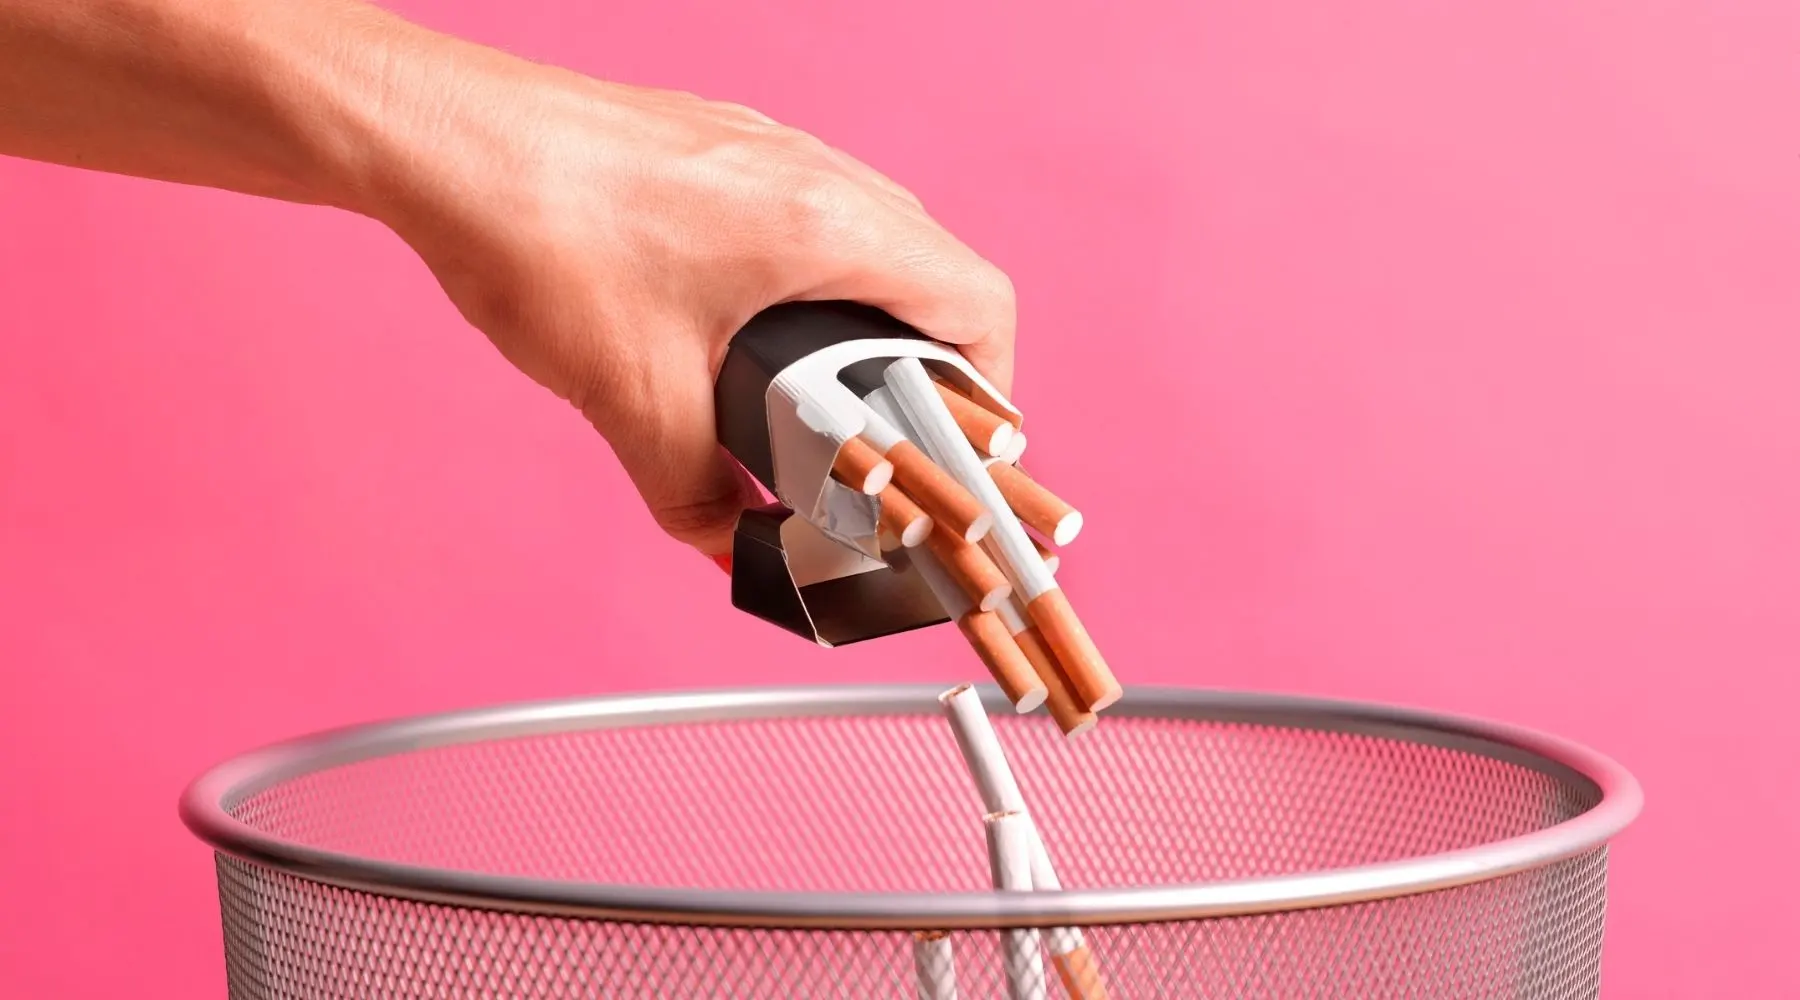 A mans hand is shown tipping cigarettes out of the packet and into a bin.